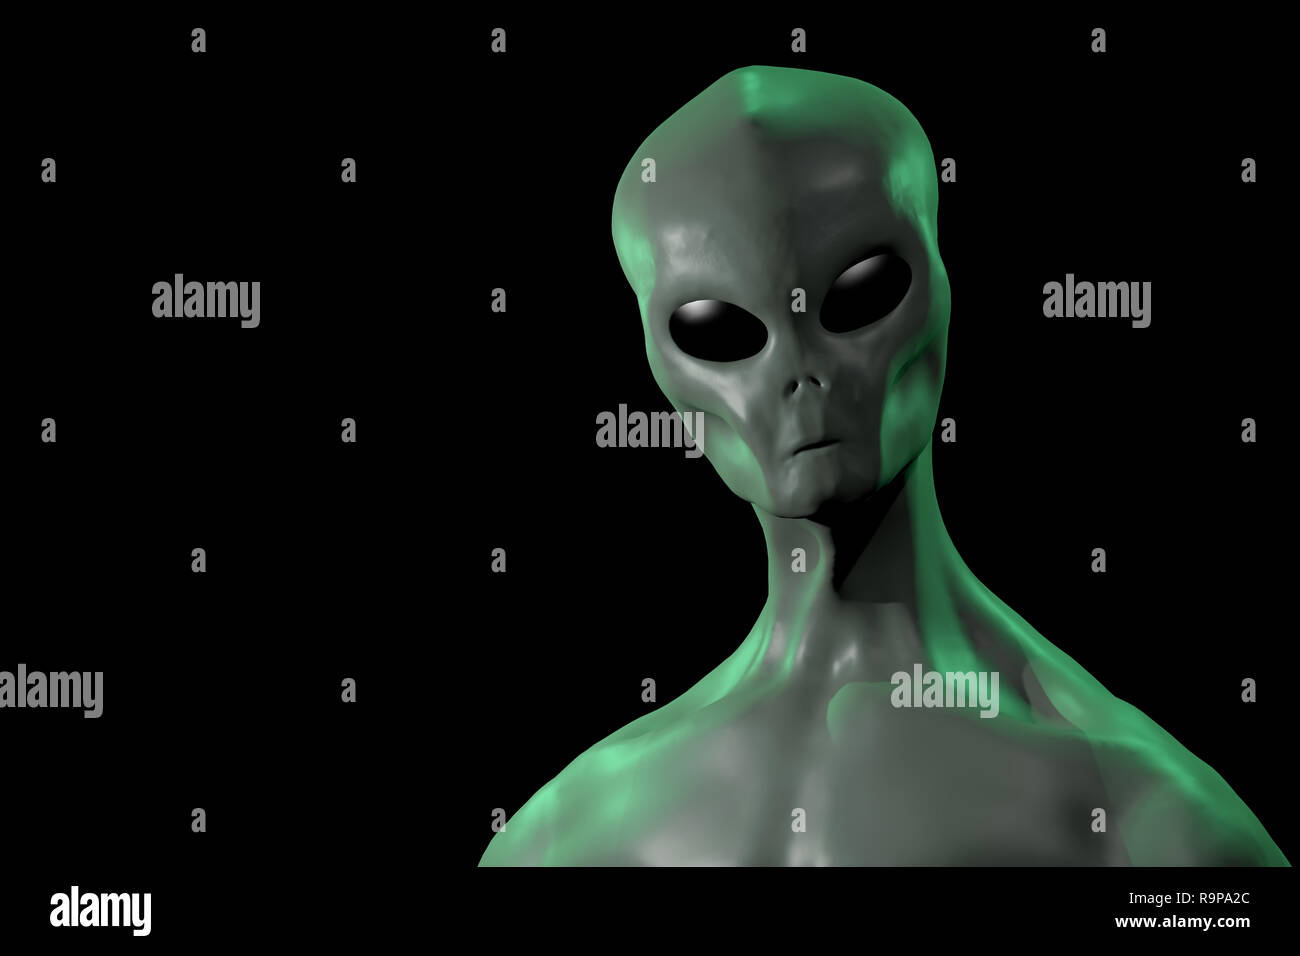 A 3D rendered image of a humanoid alien creature isolated on black background Stock Photo